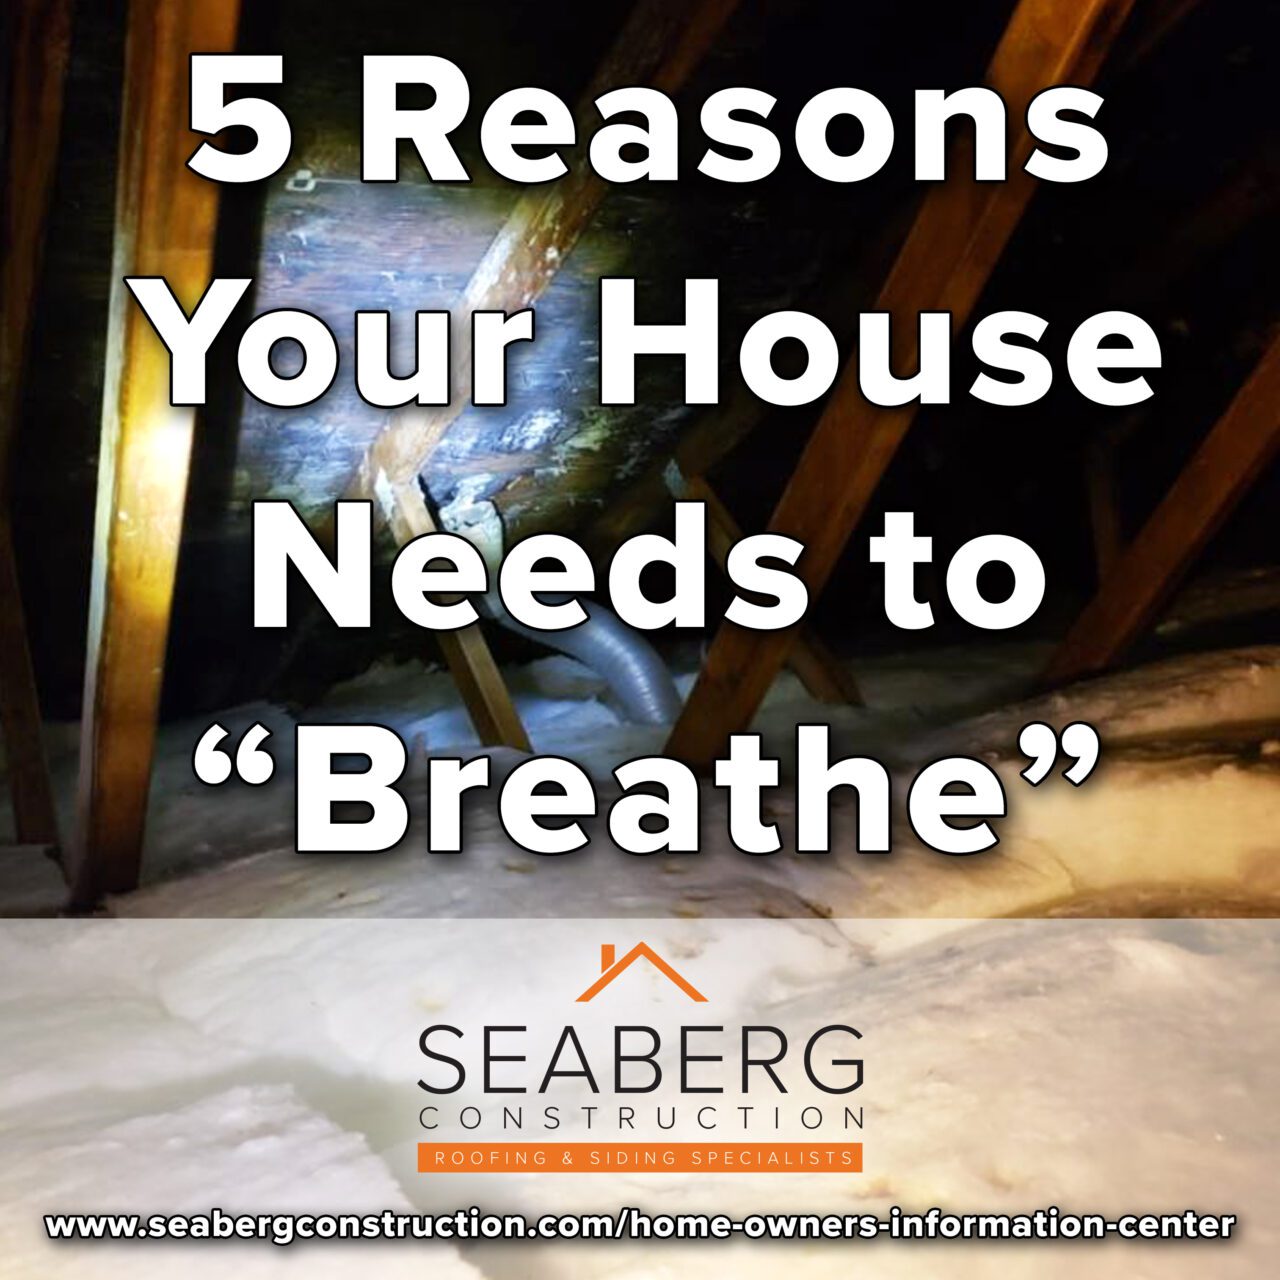 Seaberg Construction Blog - 8 Warning Signs This Winter